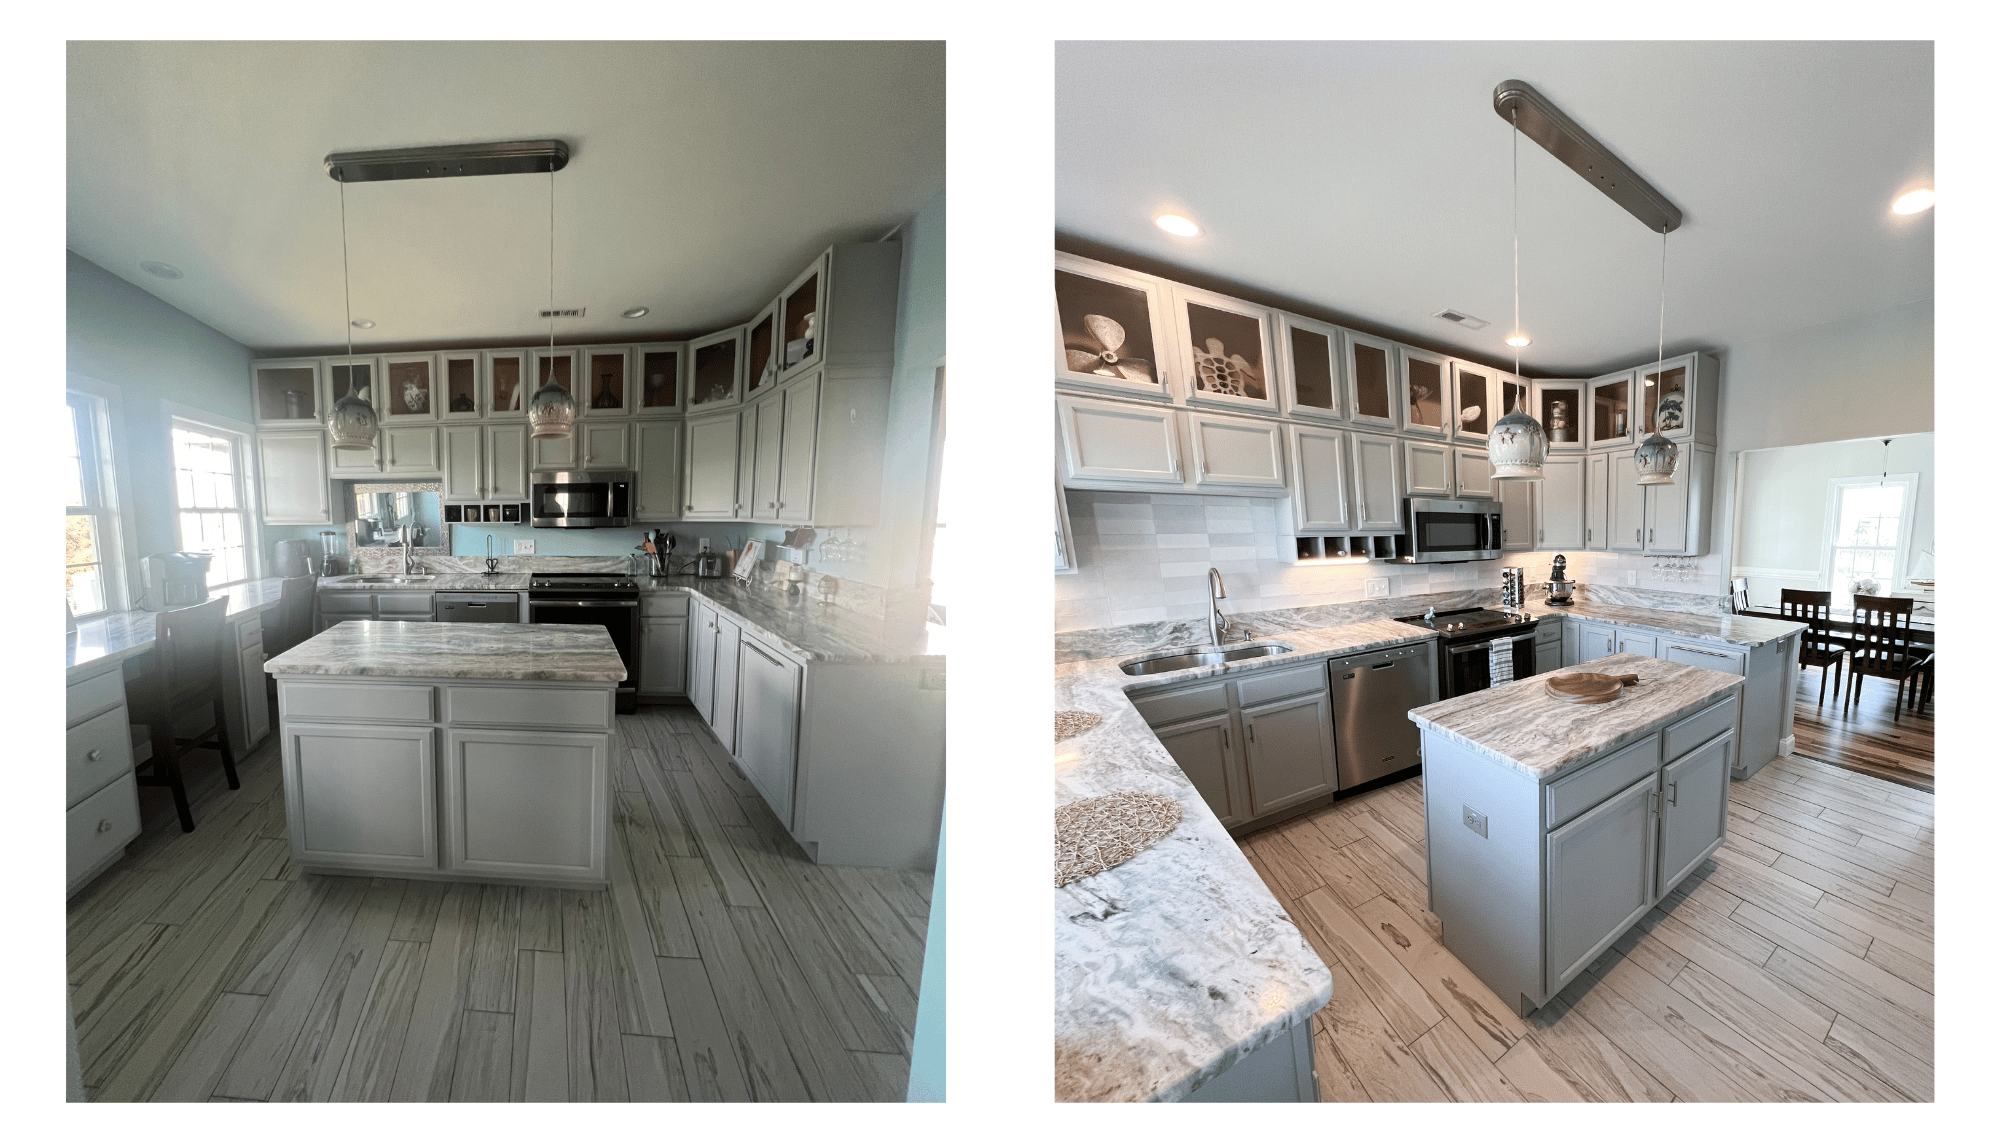 Kitchen refresh, Anchors Awey Ocean Isle Beach Before and After, Beach House flip, Ocean isle beach, NC vacation rental, Stilettos and Diapers